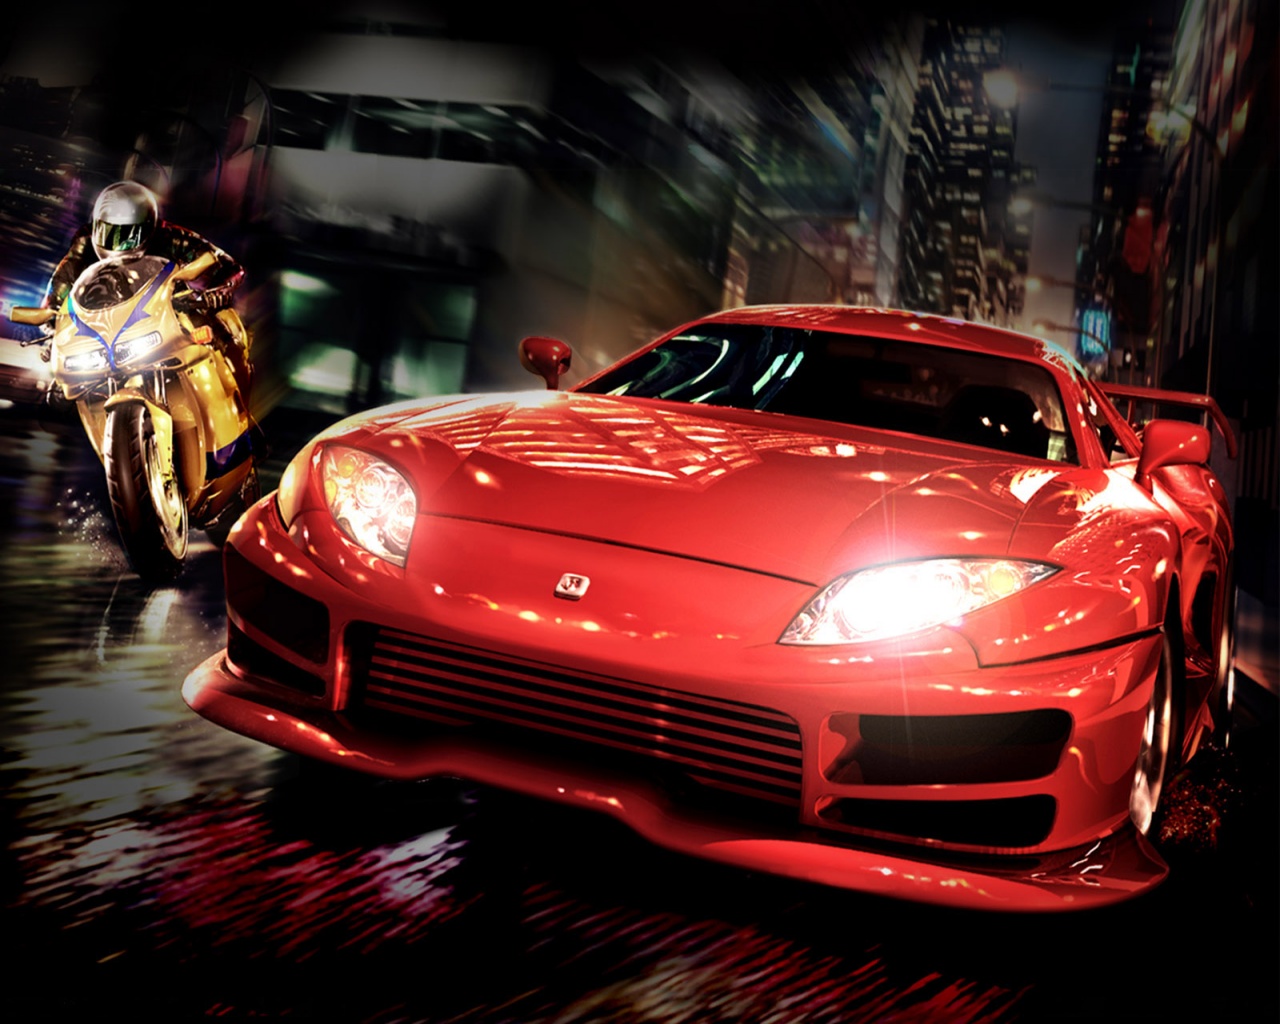 Related Pictures Bike Vs Red Car Desktop Wallpaper And Stock